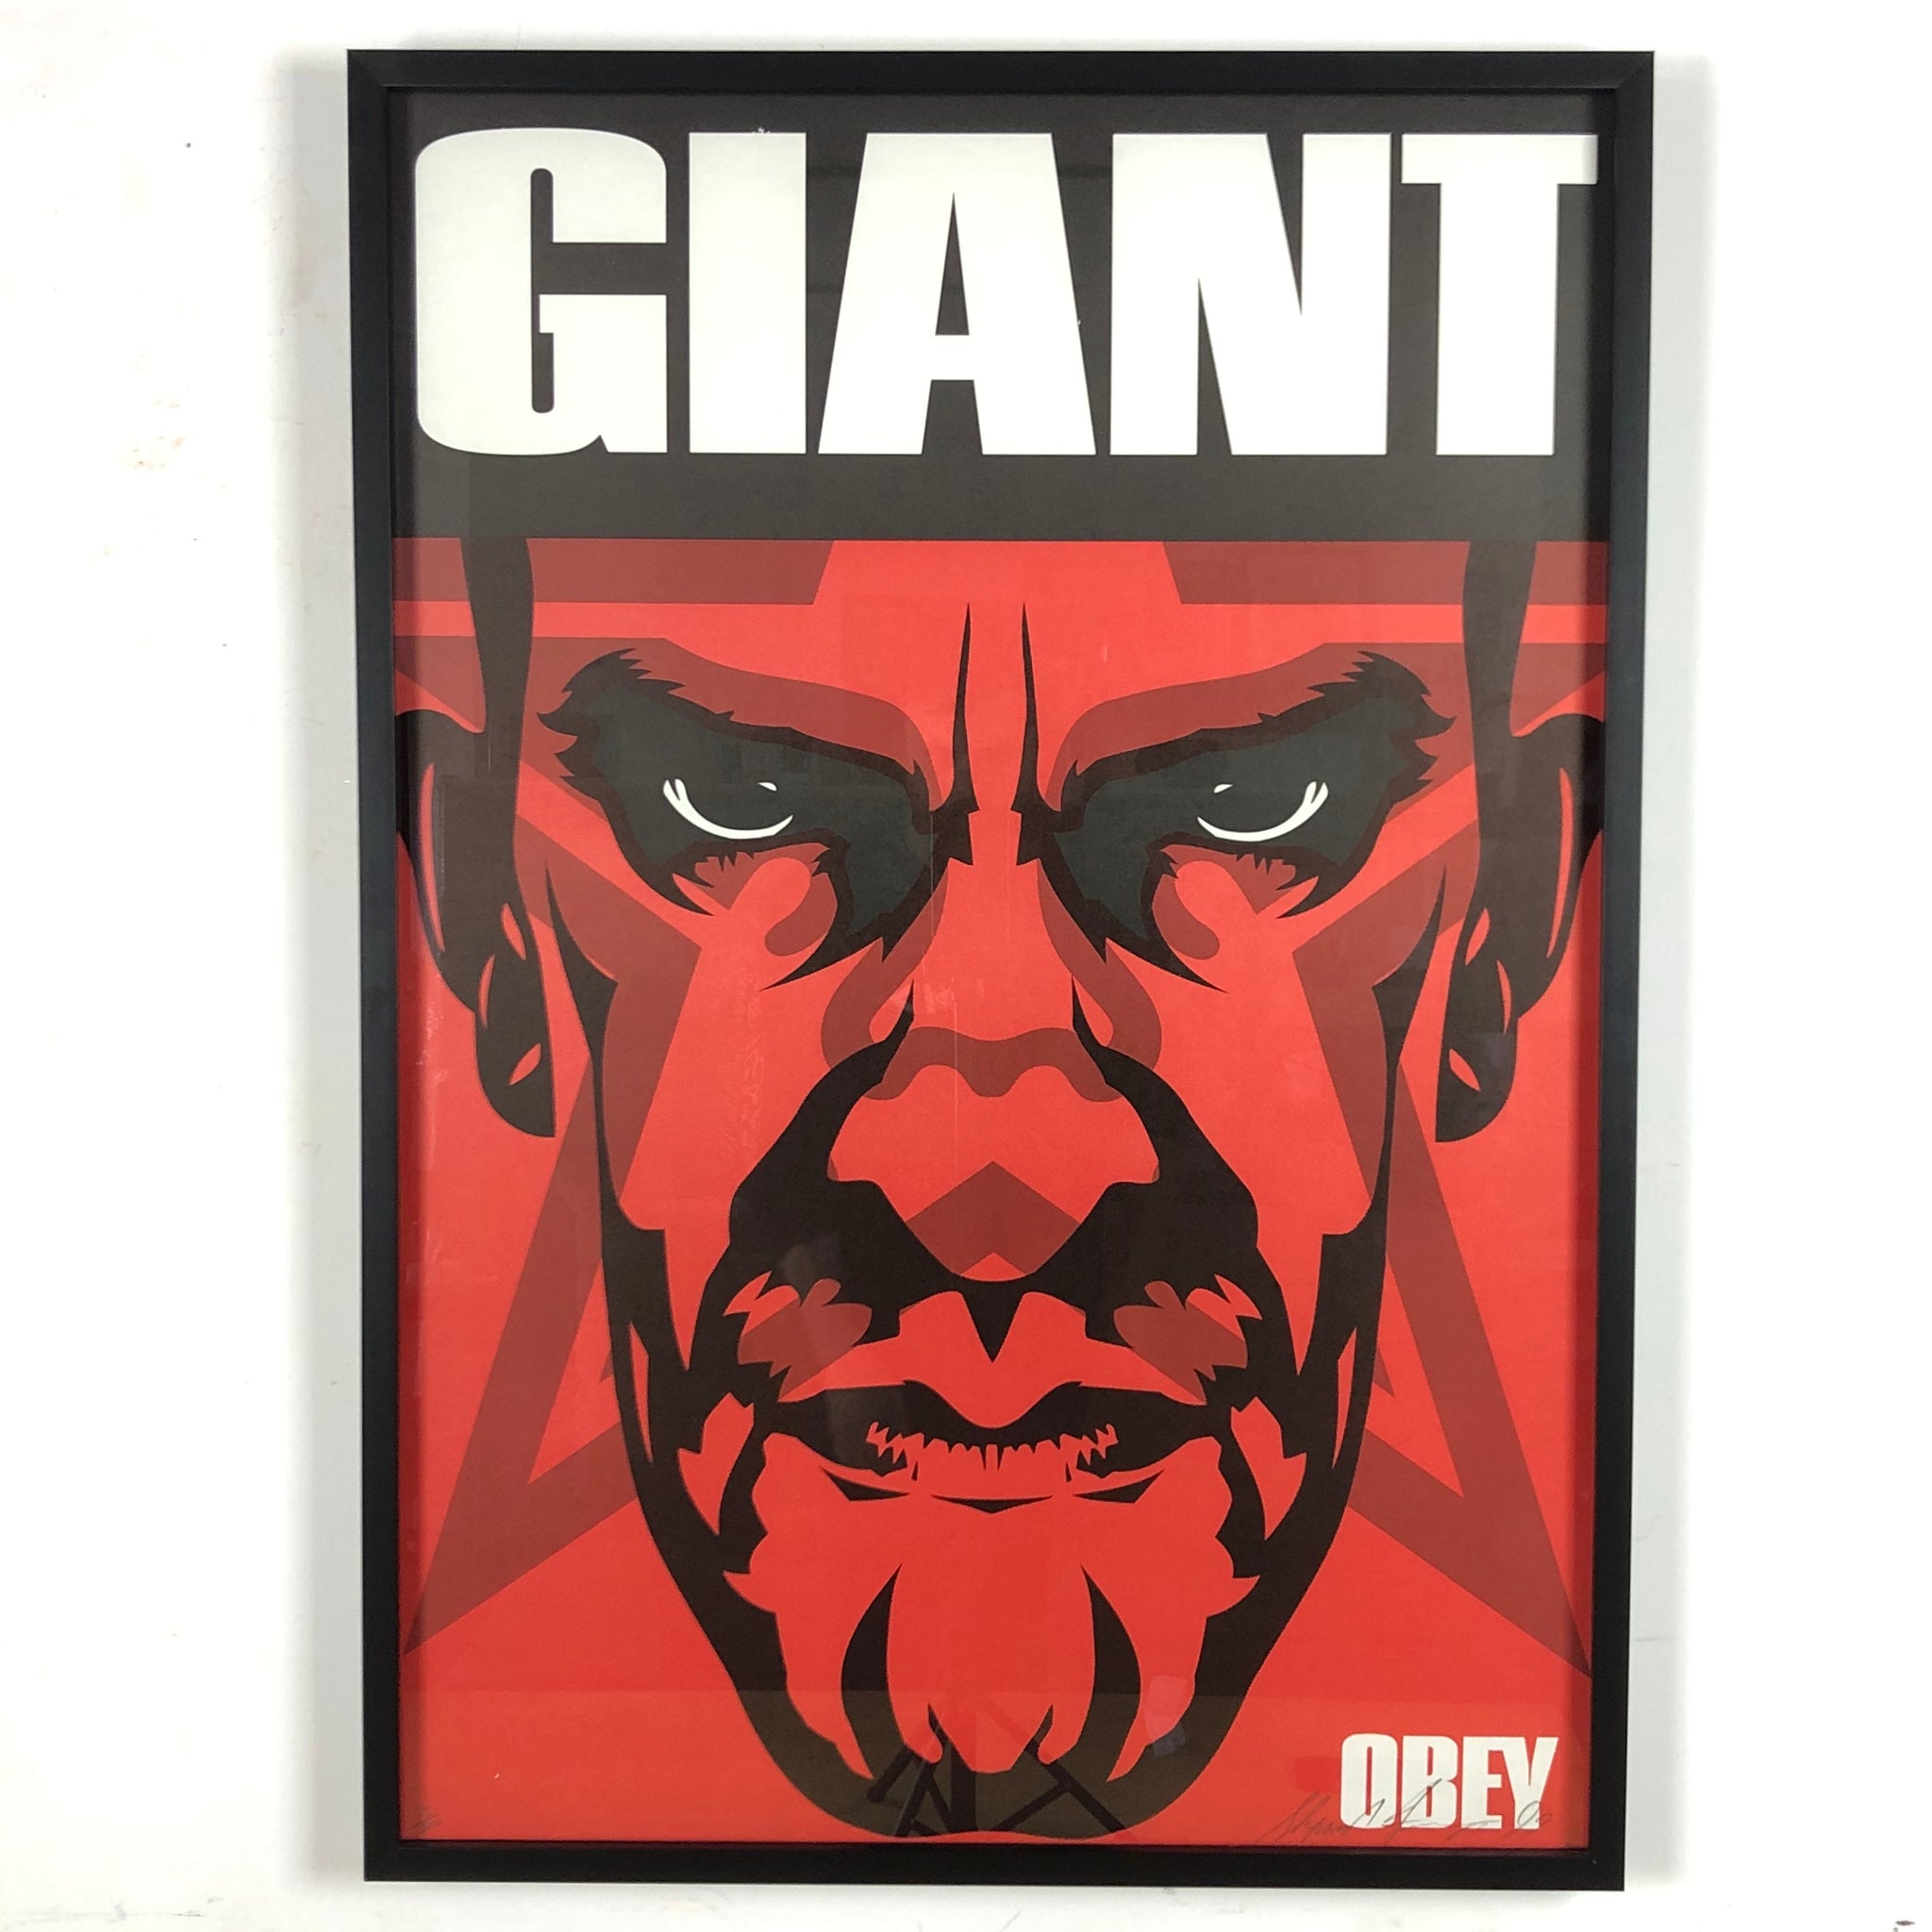 SHEPARD FAIREY (OBEY GIANT) - 1999 - BIG BROTHER '99